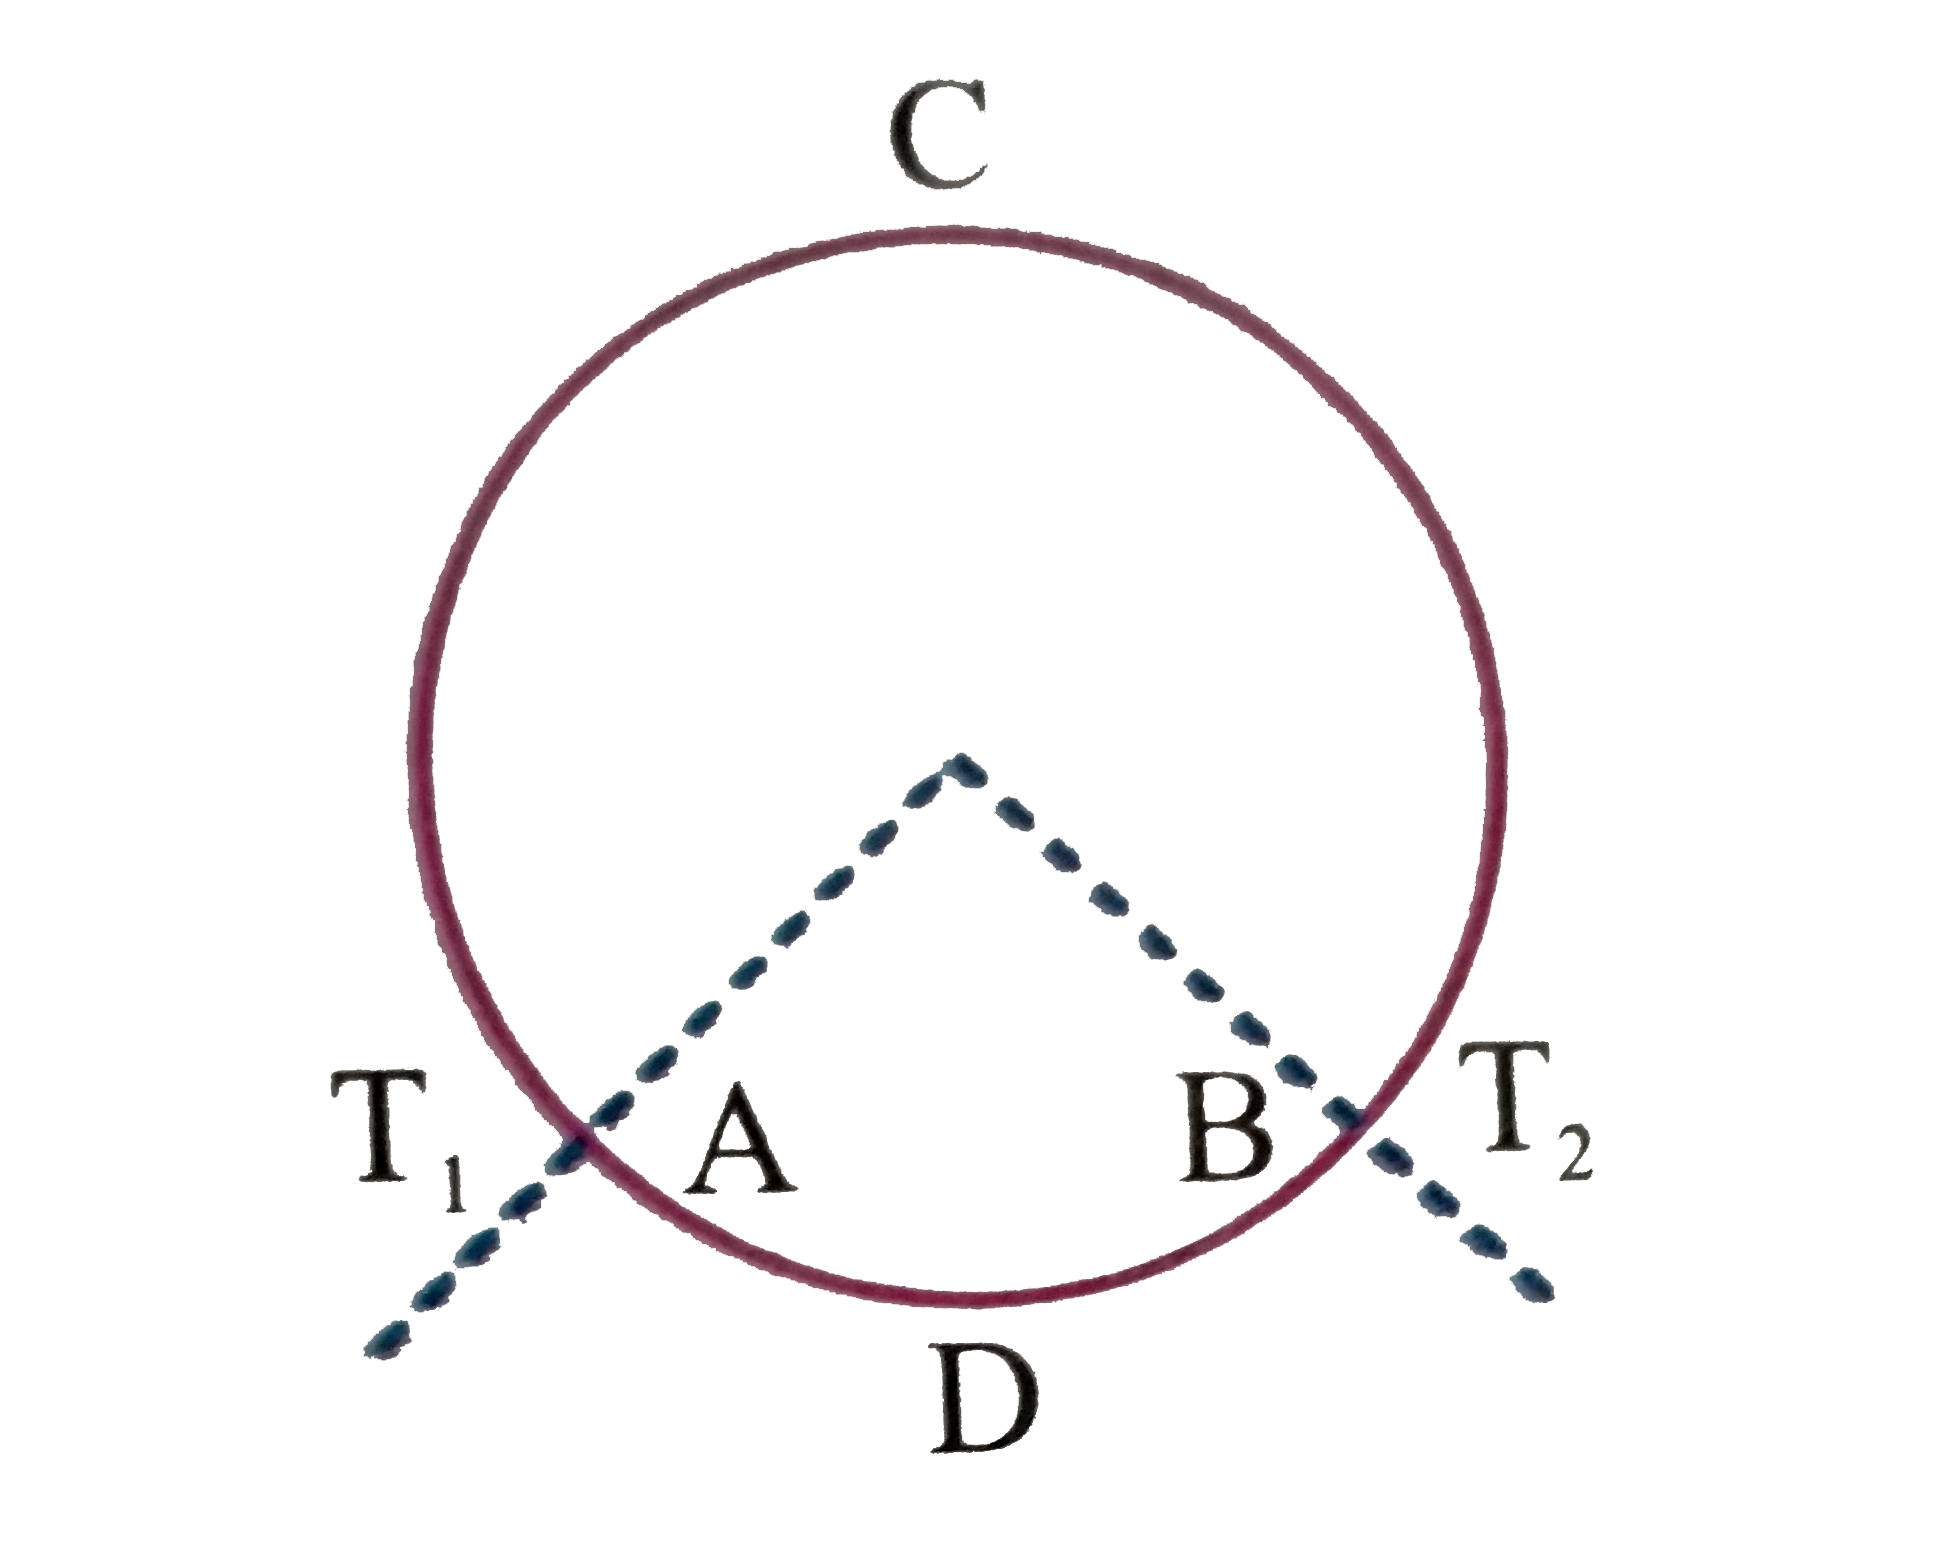 A ring consisting of two parts ADB and ACB of same conductivity k carries an amount of heat H The ADB part is now replaced with another metal keeping the temperature T91) and T(2) constant The heat carried increases to 2H What should be the conductivity of the new ADB Given (ACB)/(ADB)=3    .